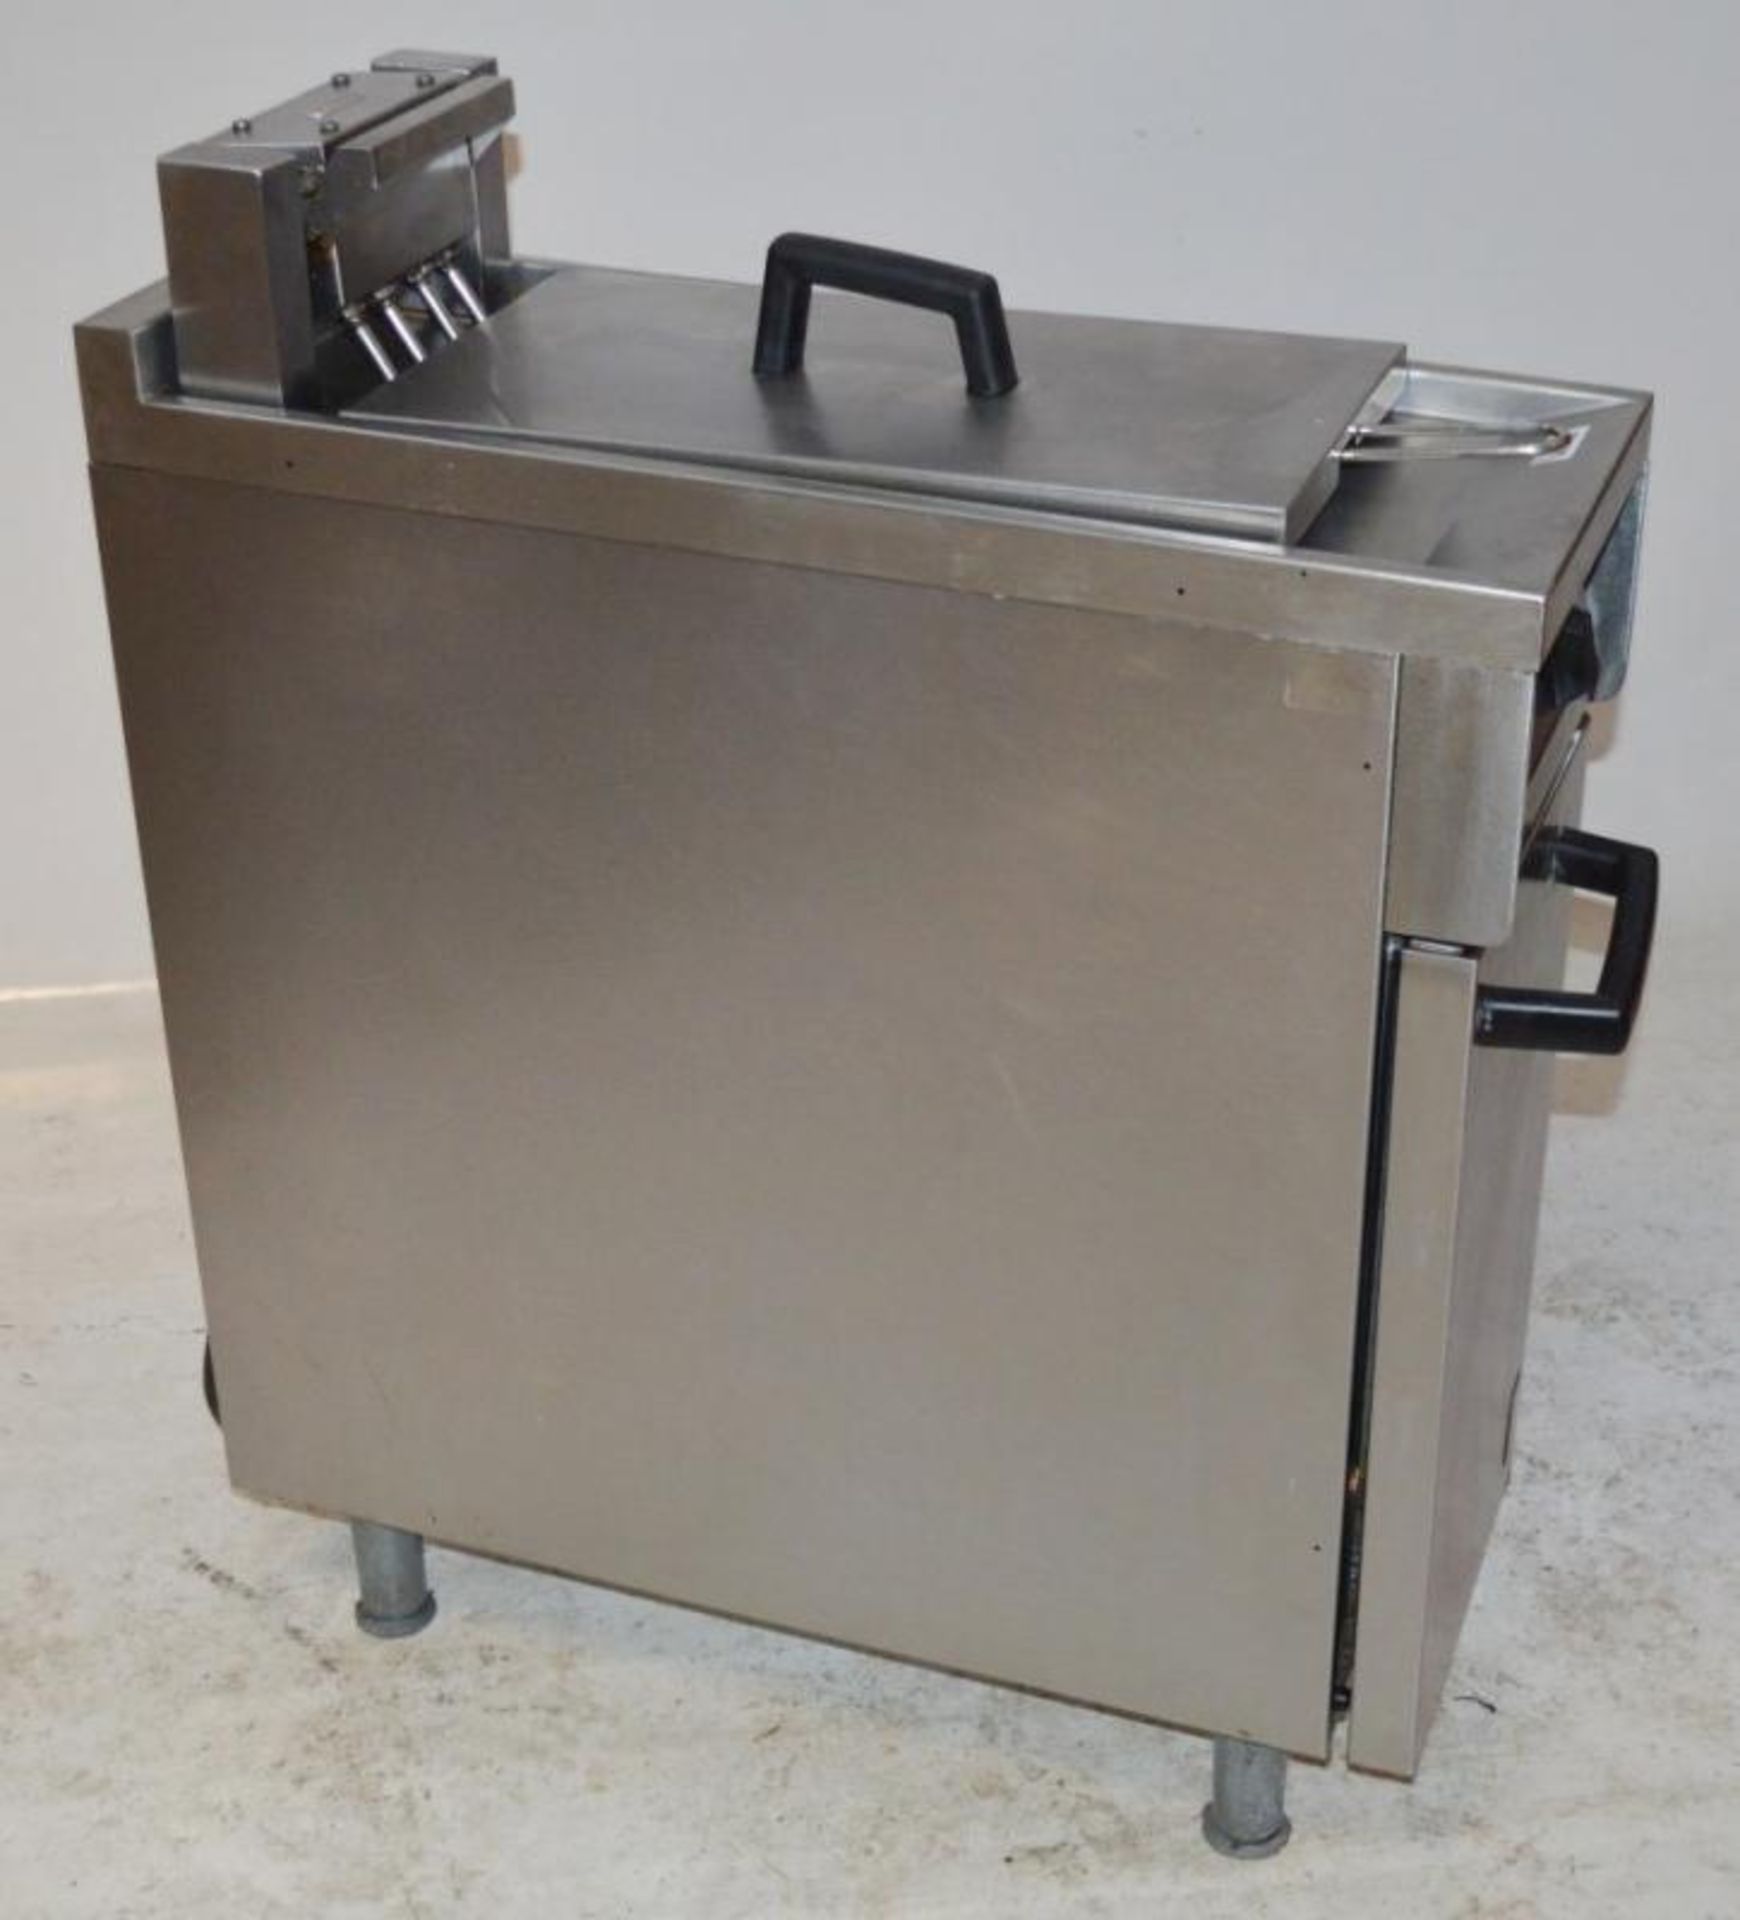 1 x Falcon Dominator E1830 Electric 3 Phase Fryer Cooker - Stainless Steel - H84 x W30 x D77 cms - C